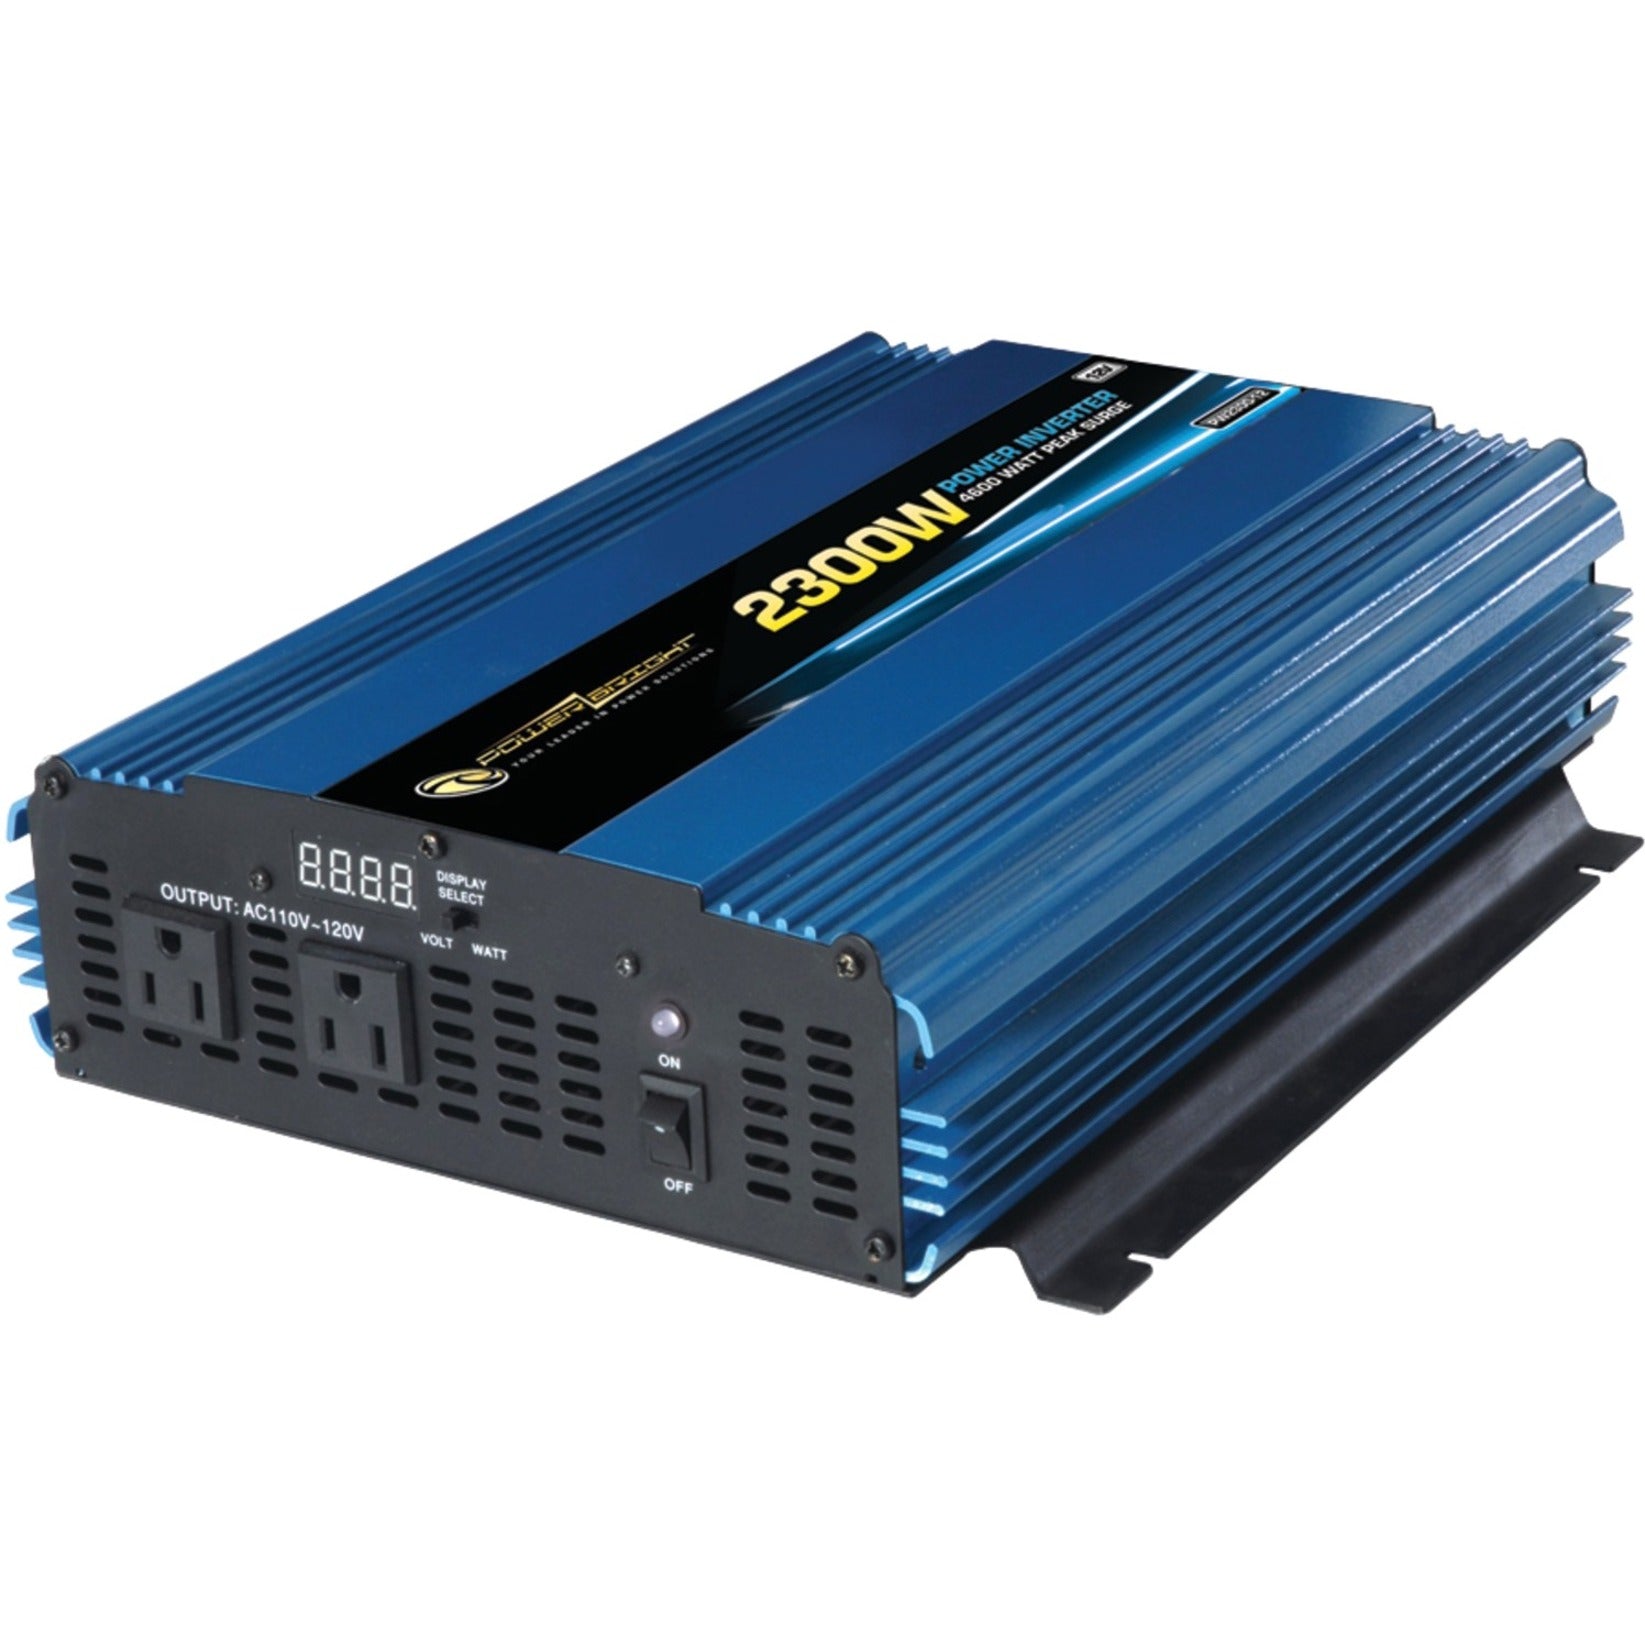 Power Bright PW2300-12 12V DC to AC 2300 Watt Power Inverter, Modified Sine Wave, 2 x AC Out